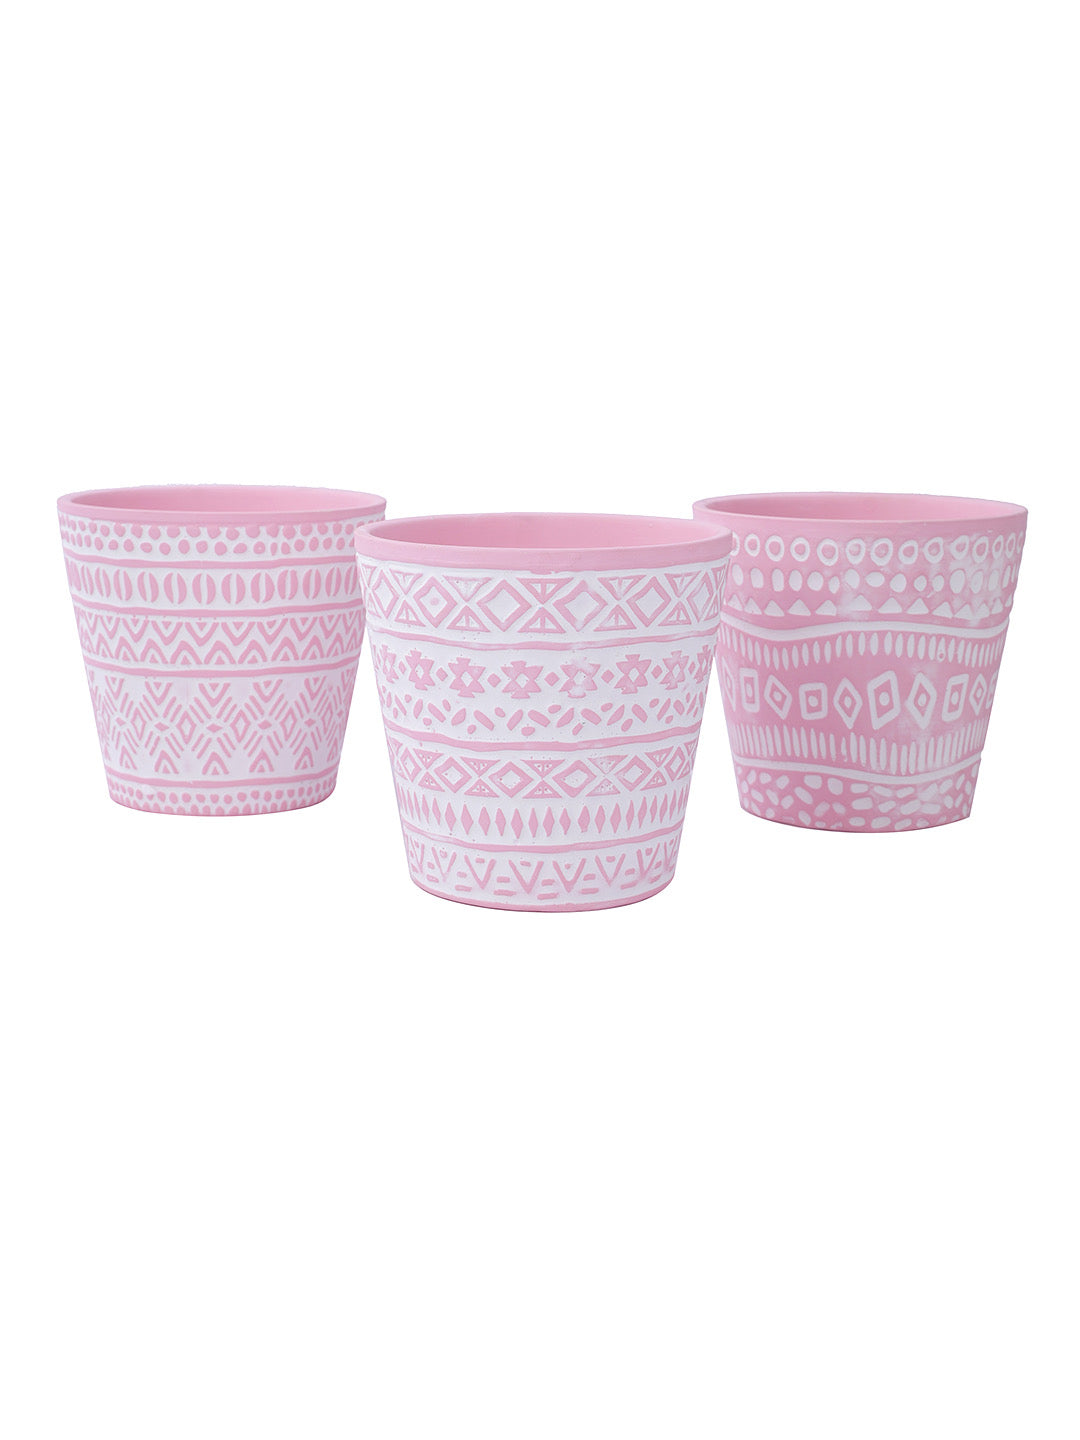 Set of 3 bright colored Planters with white tribal design - Default Title (CH210110_3)